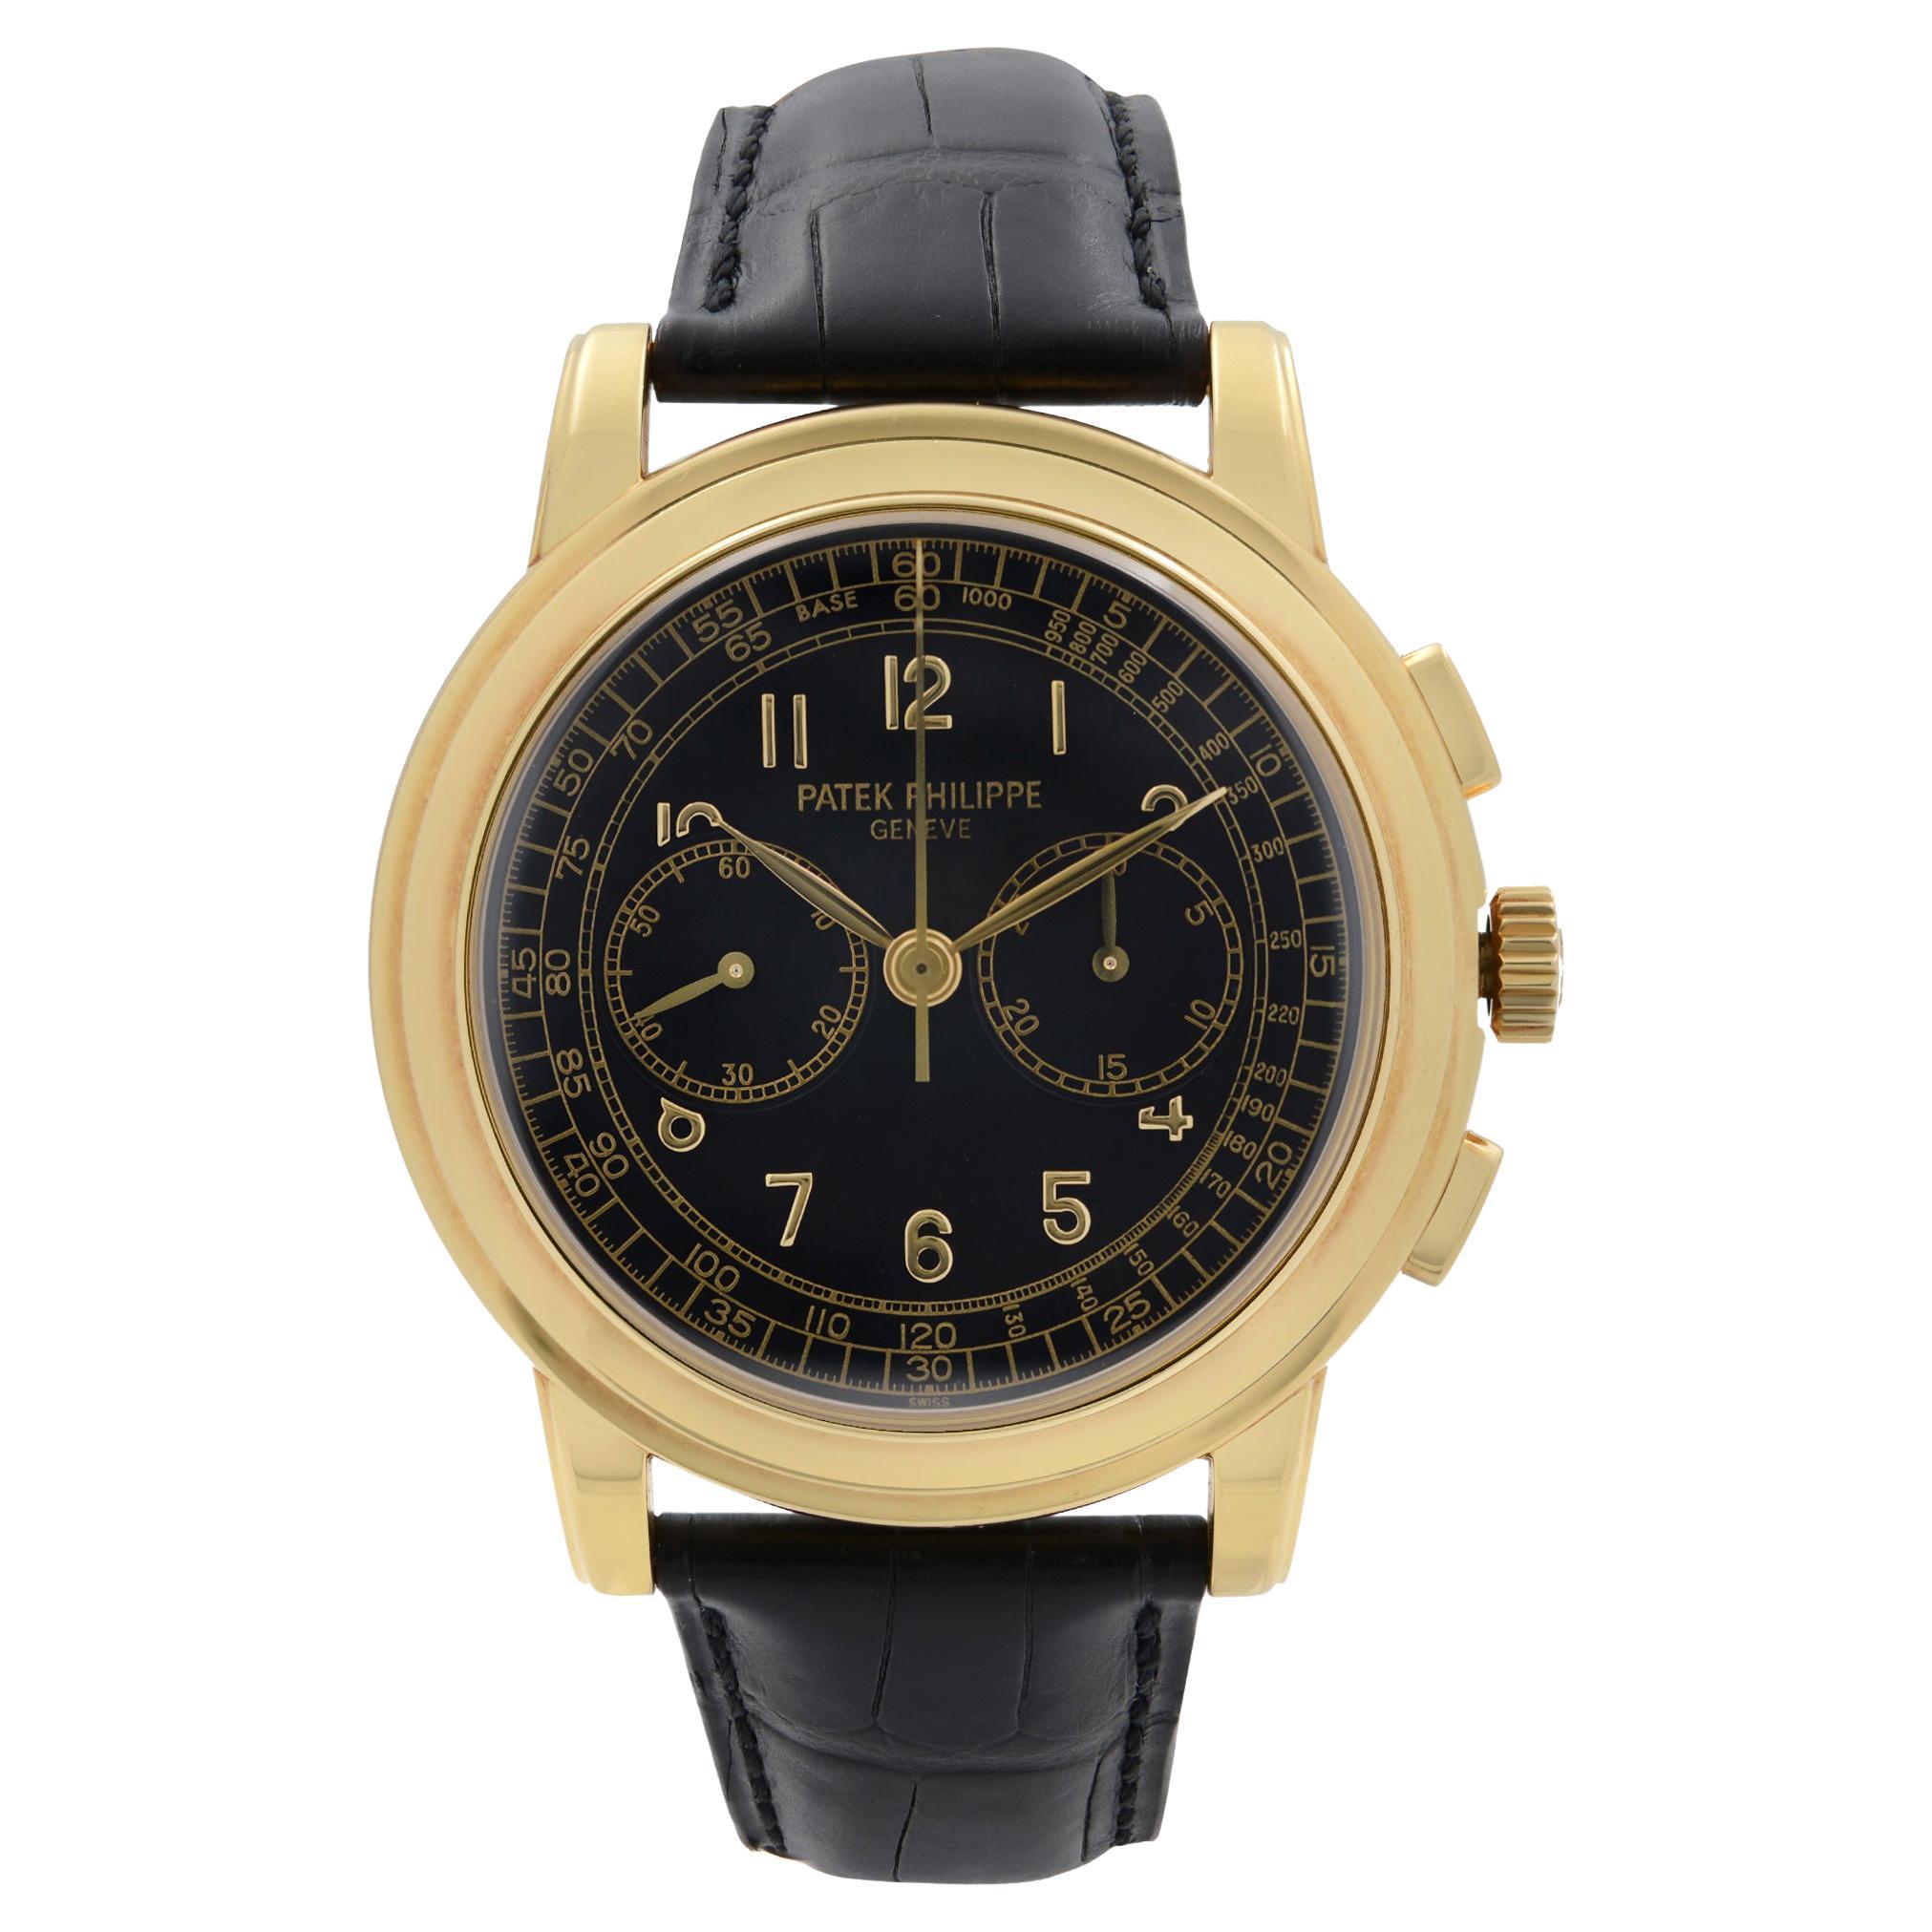 Patek Philippe Complications Chronograph Yellow Gold Hand Wind Watch 5070J-001 For Sale